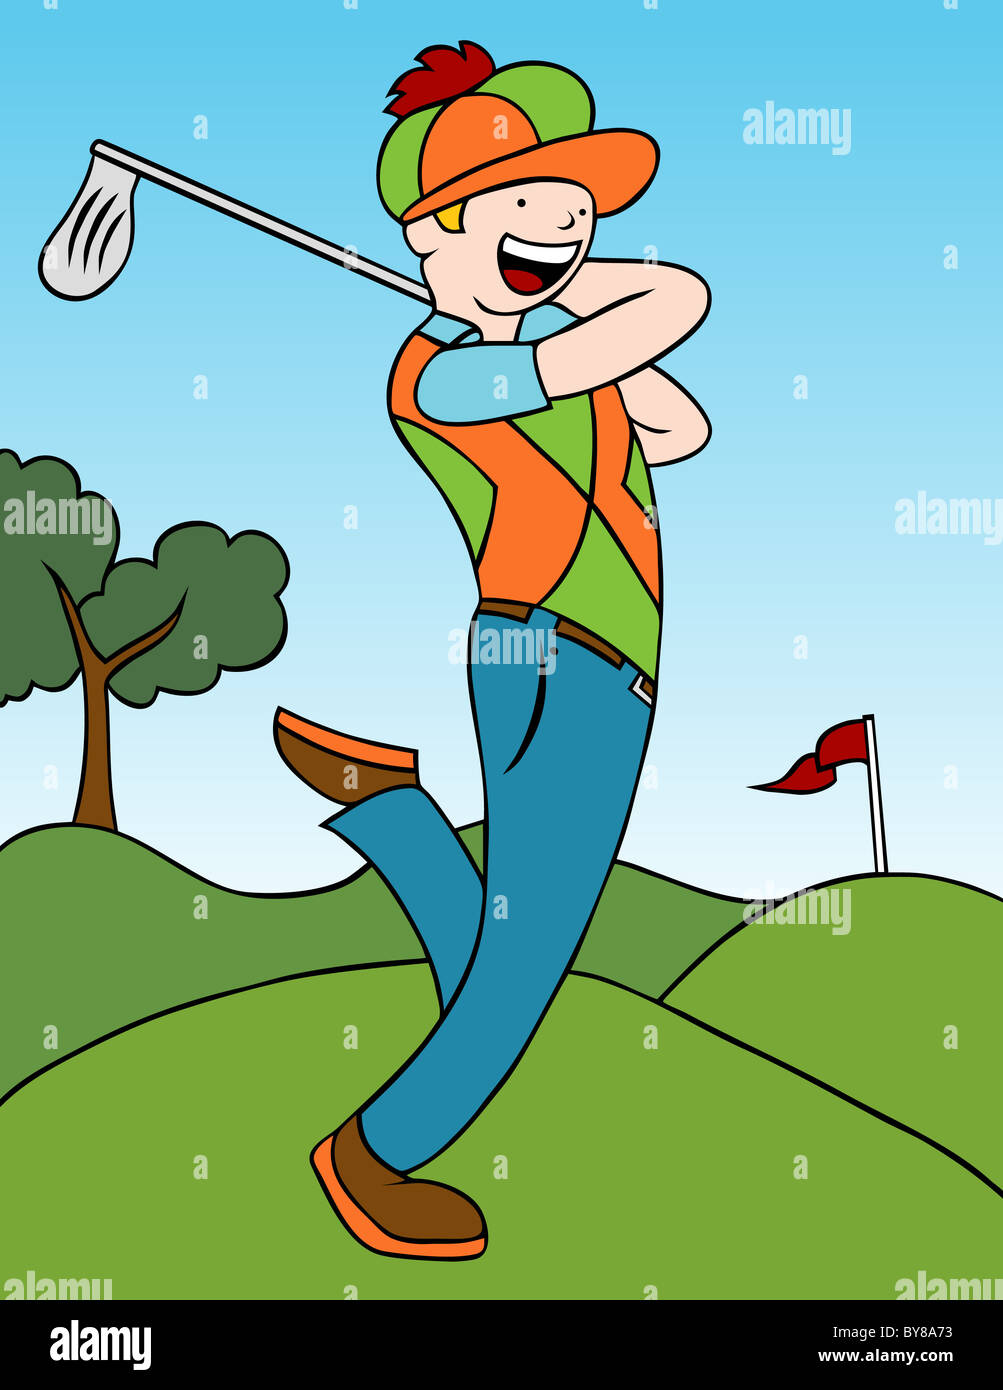 Cartoon of a man swinging his golf club on the course Stock Photo - Alamy